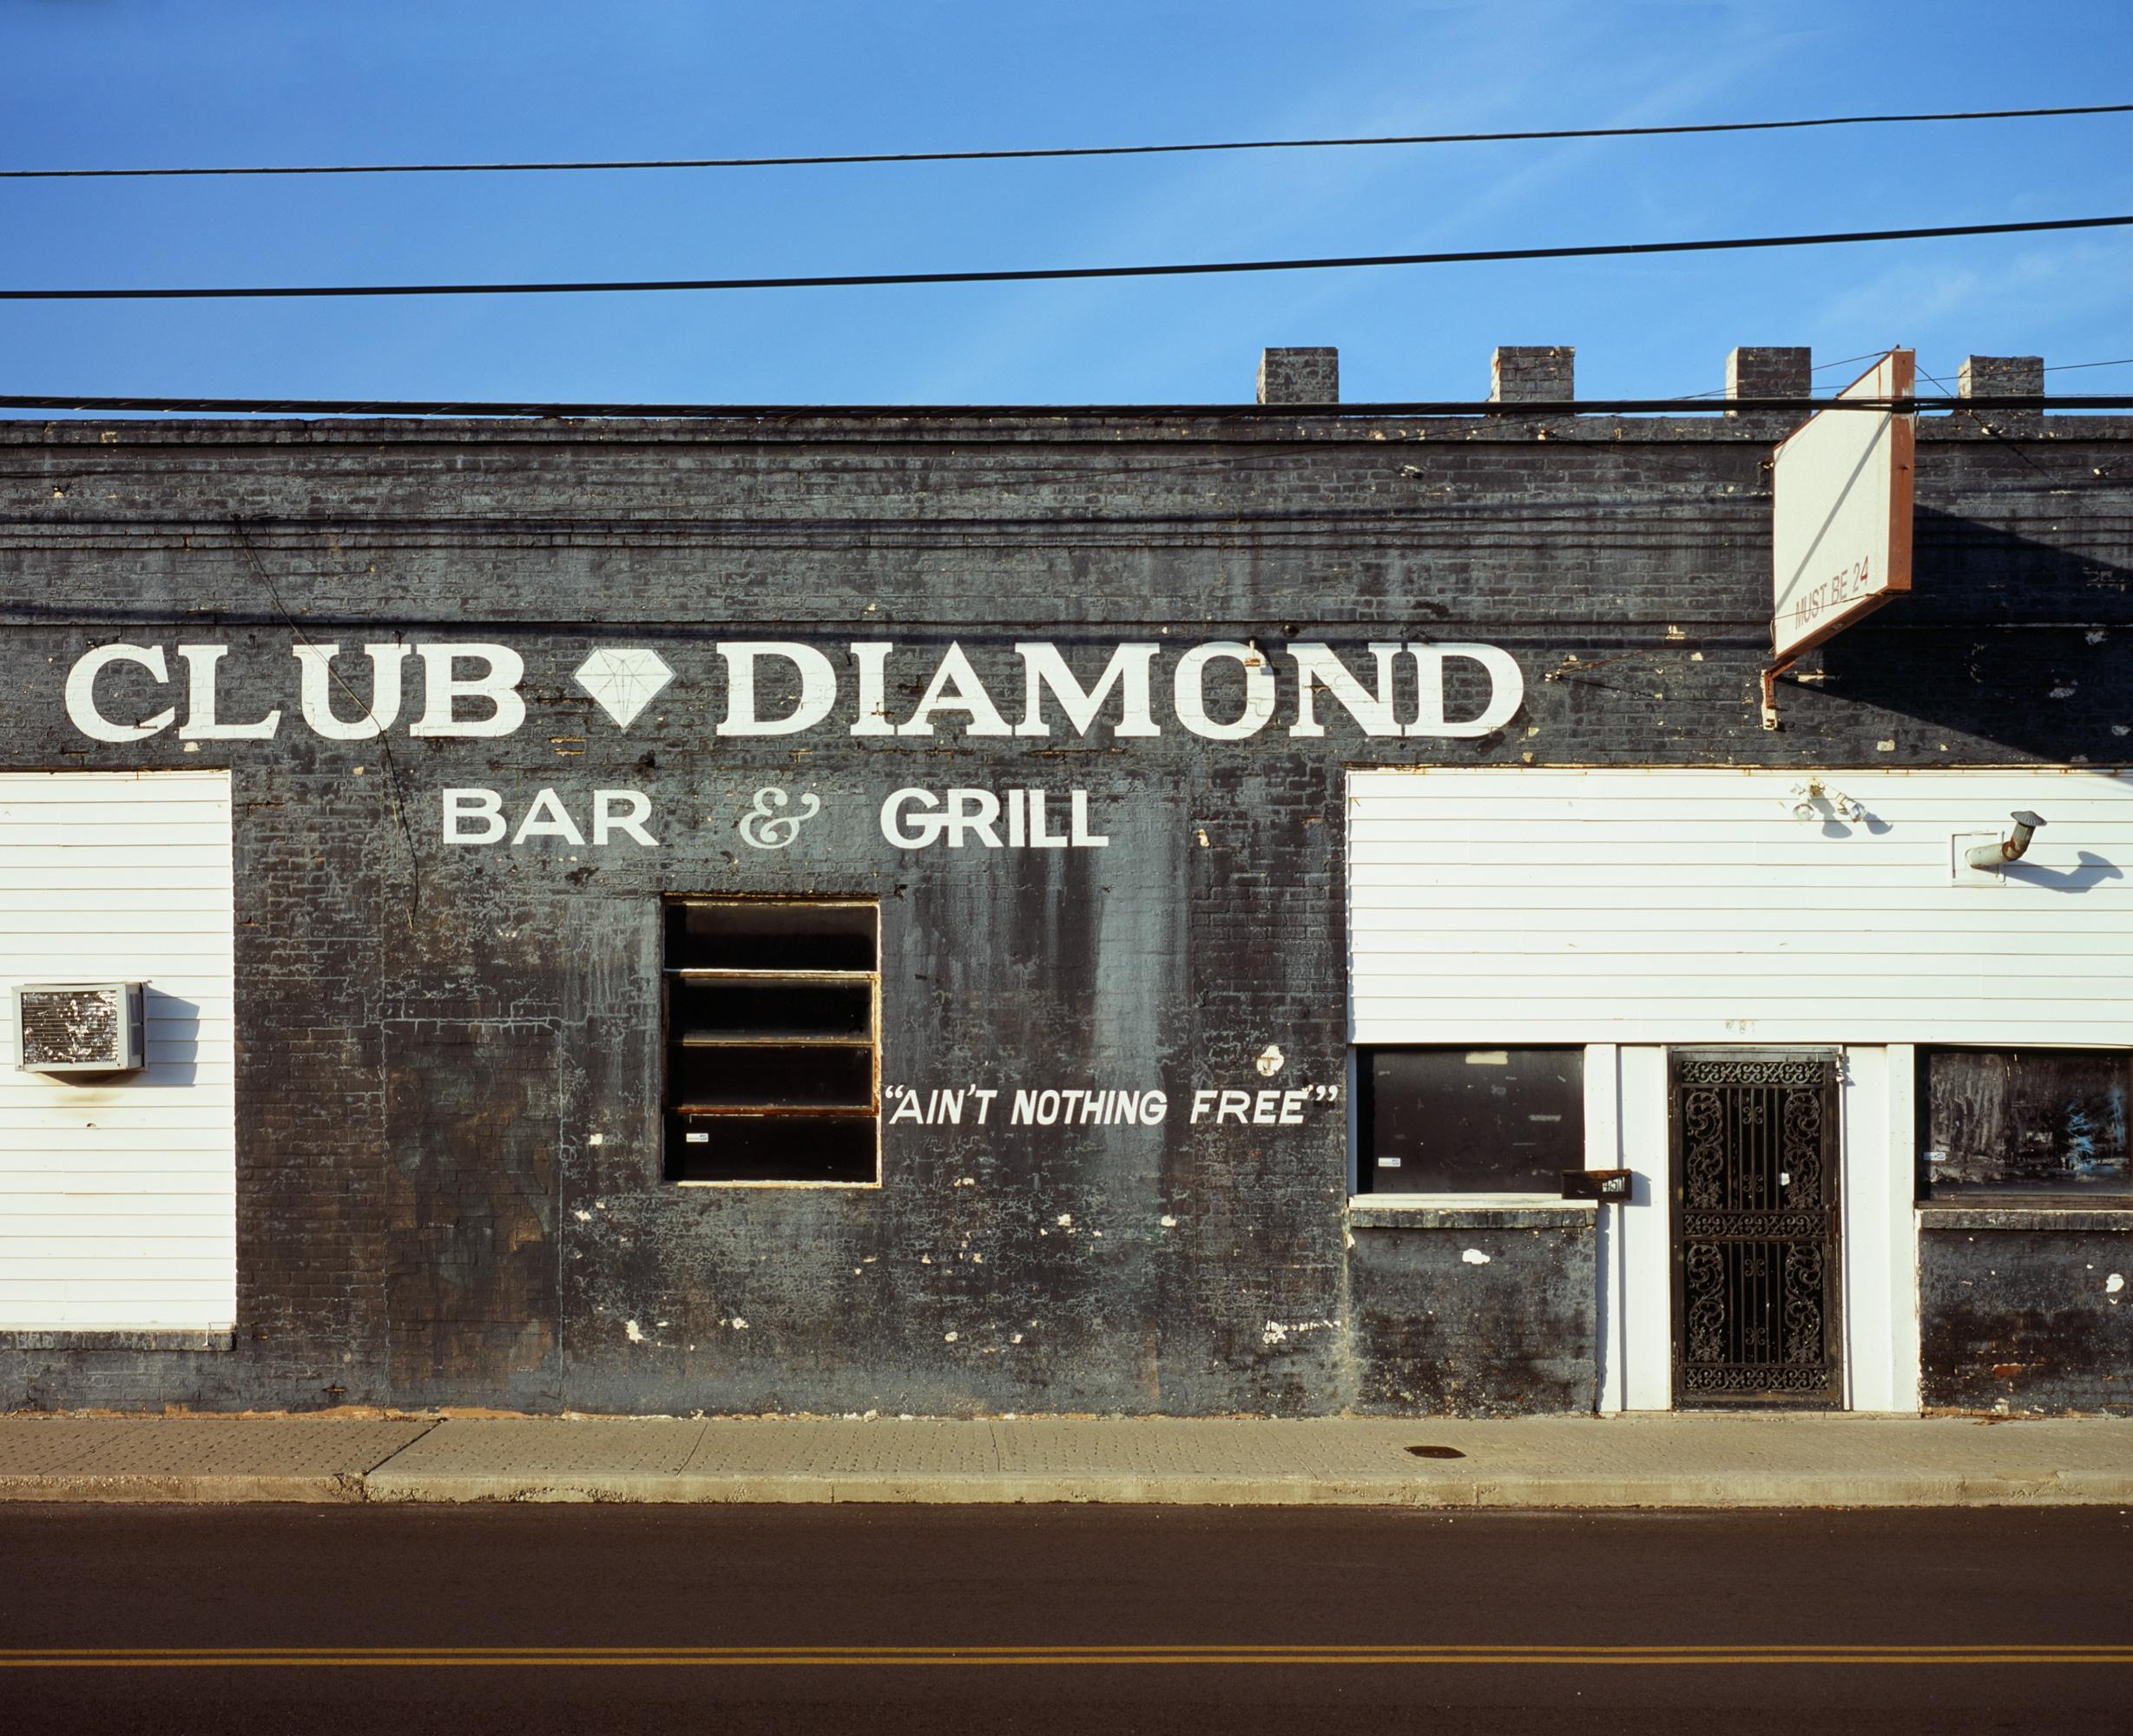 Patrick Sansone uses analog cameras and film to create photographs that reference stillness, lure, and intermission. Decaying signage, abandoned industrial sites, and defunct storefronts are the artifacts of a near-mythic America, now abandoned.